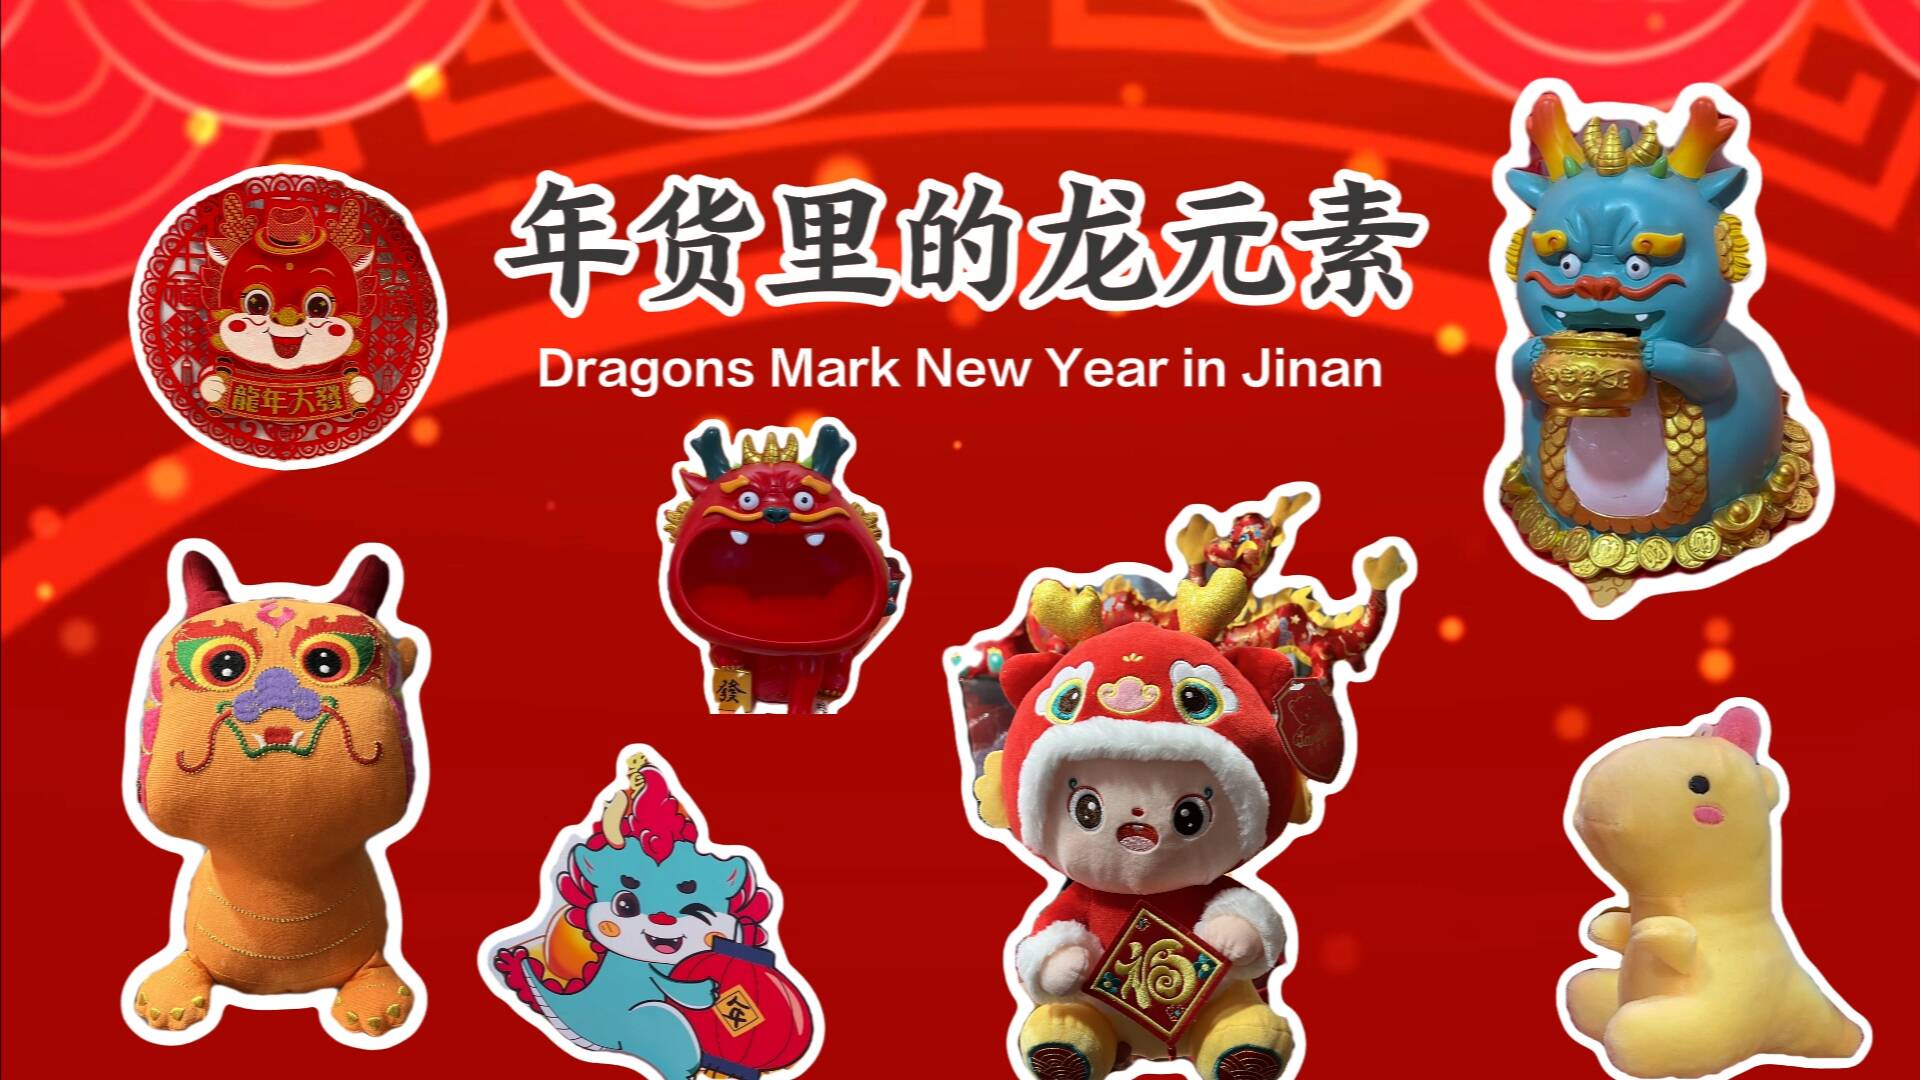  "Dragon Element" has become the main character of New Year's products. Are you ready to start?